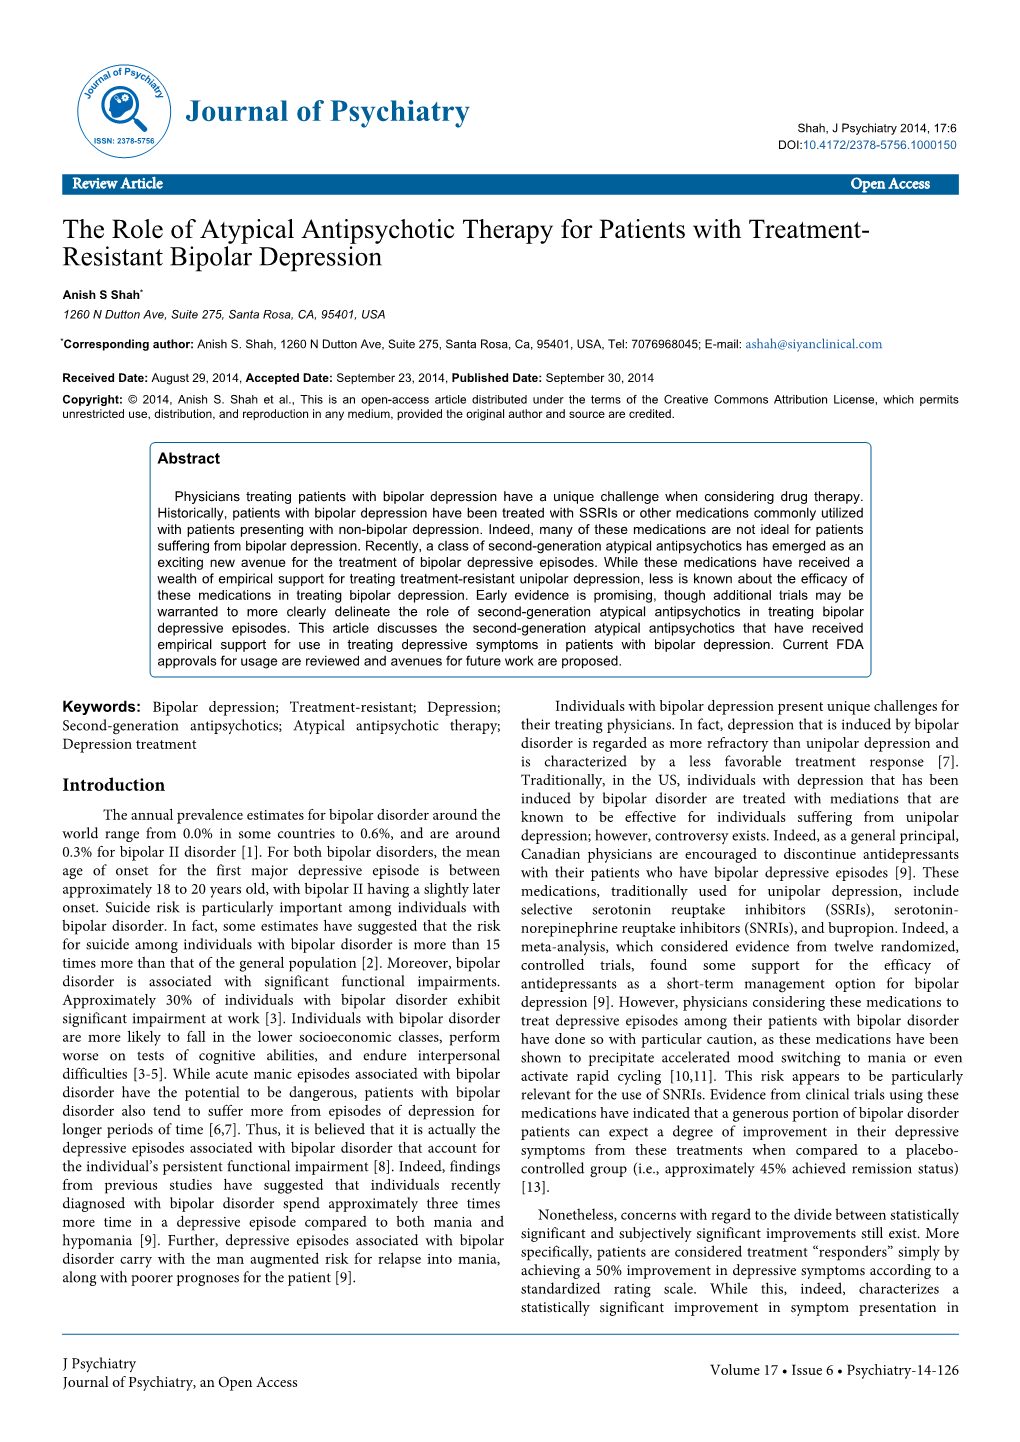 The Role of Atypical Antipsychotic Therapy for Patients with Treatment- Resistant Bipolar Depression